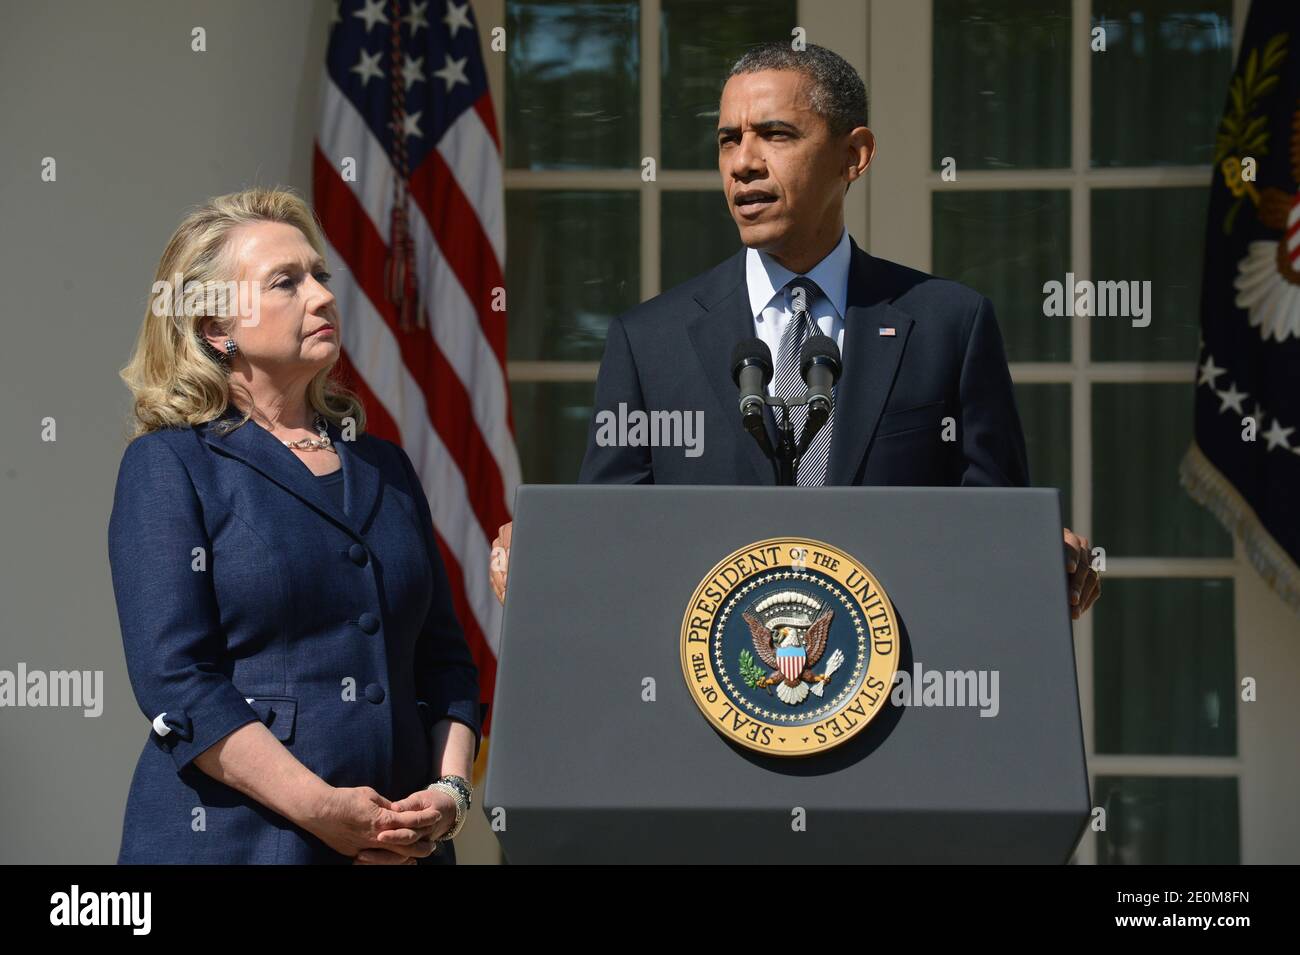 US President Barack Obama (R) delivers remarks beside US Secretary of State Hillary Clinton (L) on the killing of US ambassador to Libya, Christopher Stevens, and three embassy staff, in the Rose Garden of the White House in Washington DC, USA on September 12, 2012. Gunmen attacked the US consulate in Benghazi, killing US ambassador to Libya, Christopher Stevens, late 11 September 2012, while another assault took place on the US embassy in Cairo. Photo by Michael Reynolds/Pool/ABACAPRESS.COM Stock Photo